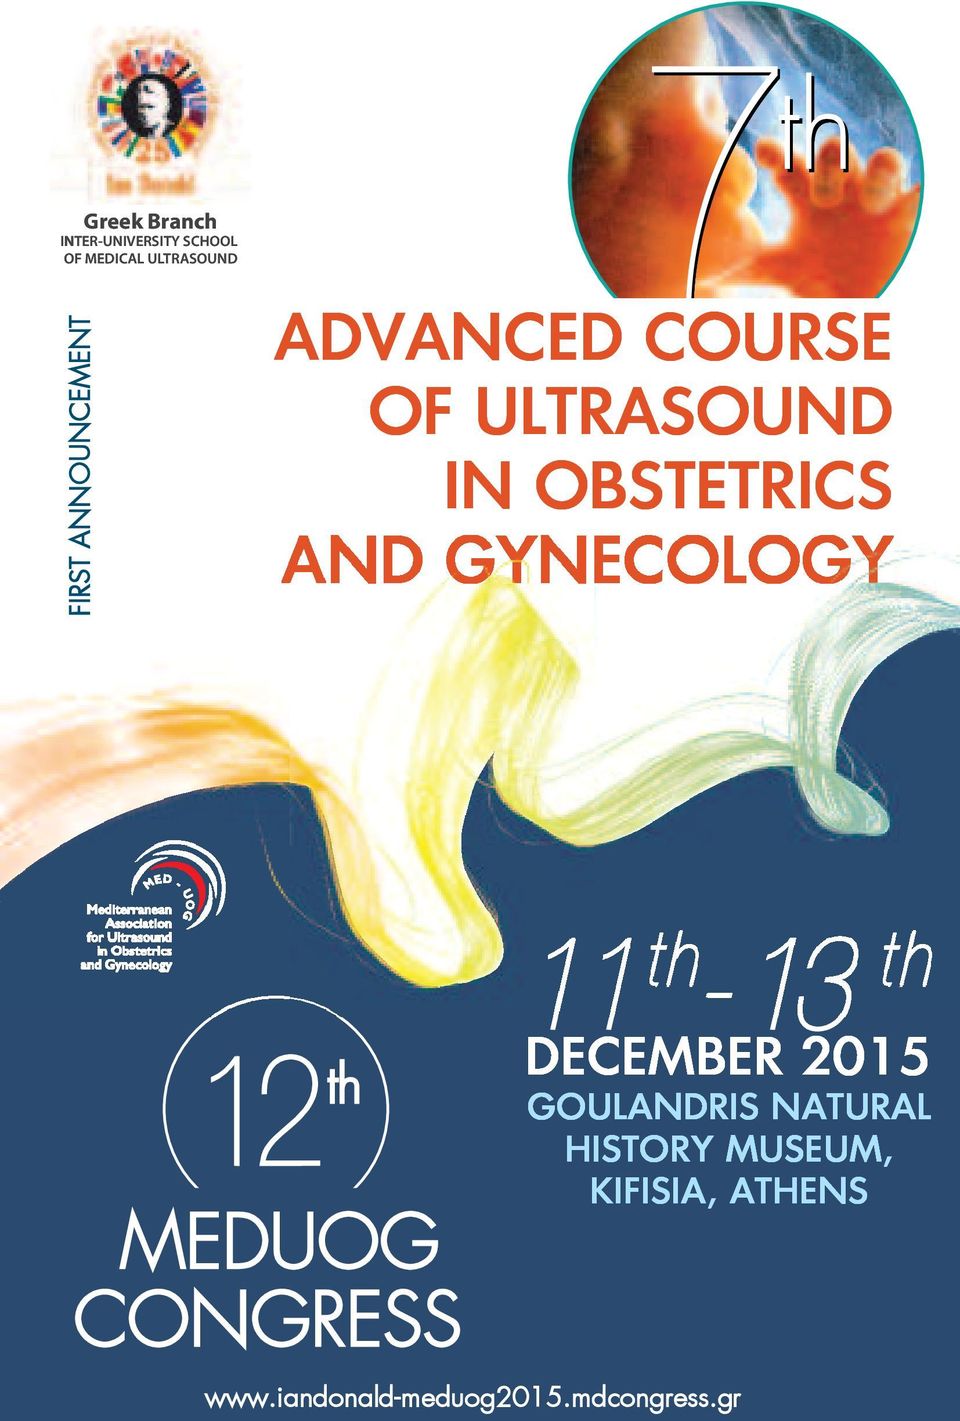 OBSTETRICS AND GYNECOLOGY 12 th MEDUOG CONGRESS 11 1 th -13 th DECEMBER